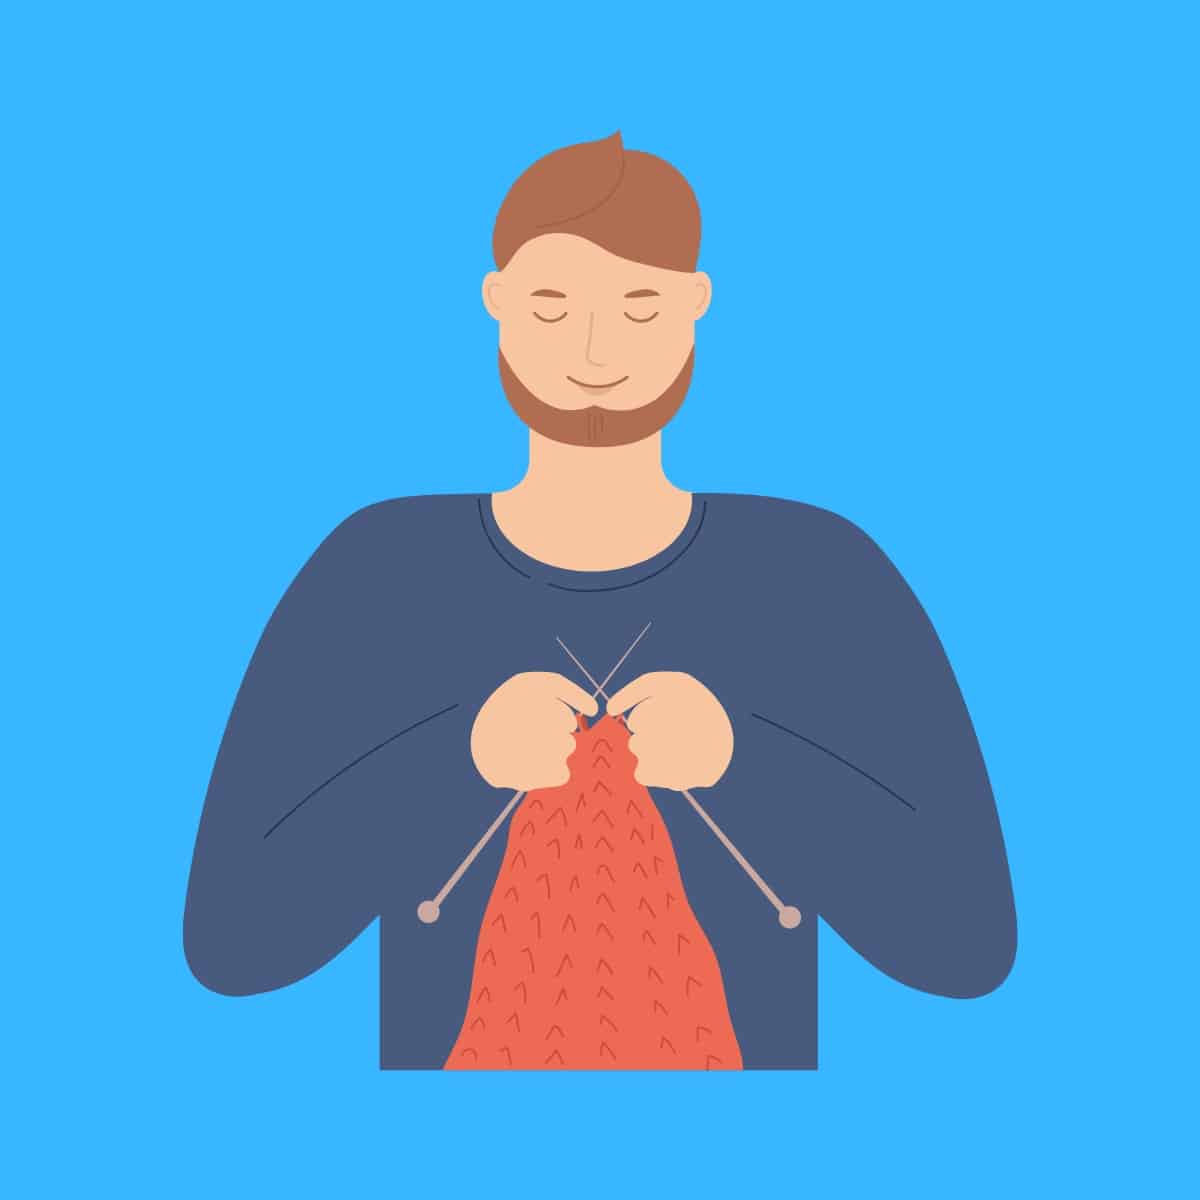 Cartoon graphic of a man knitting on blue background.